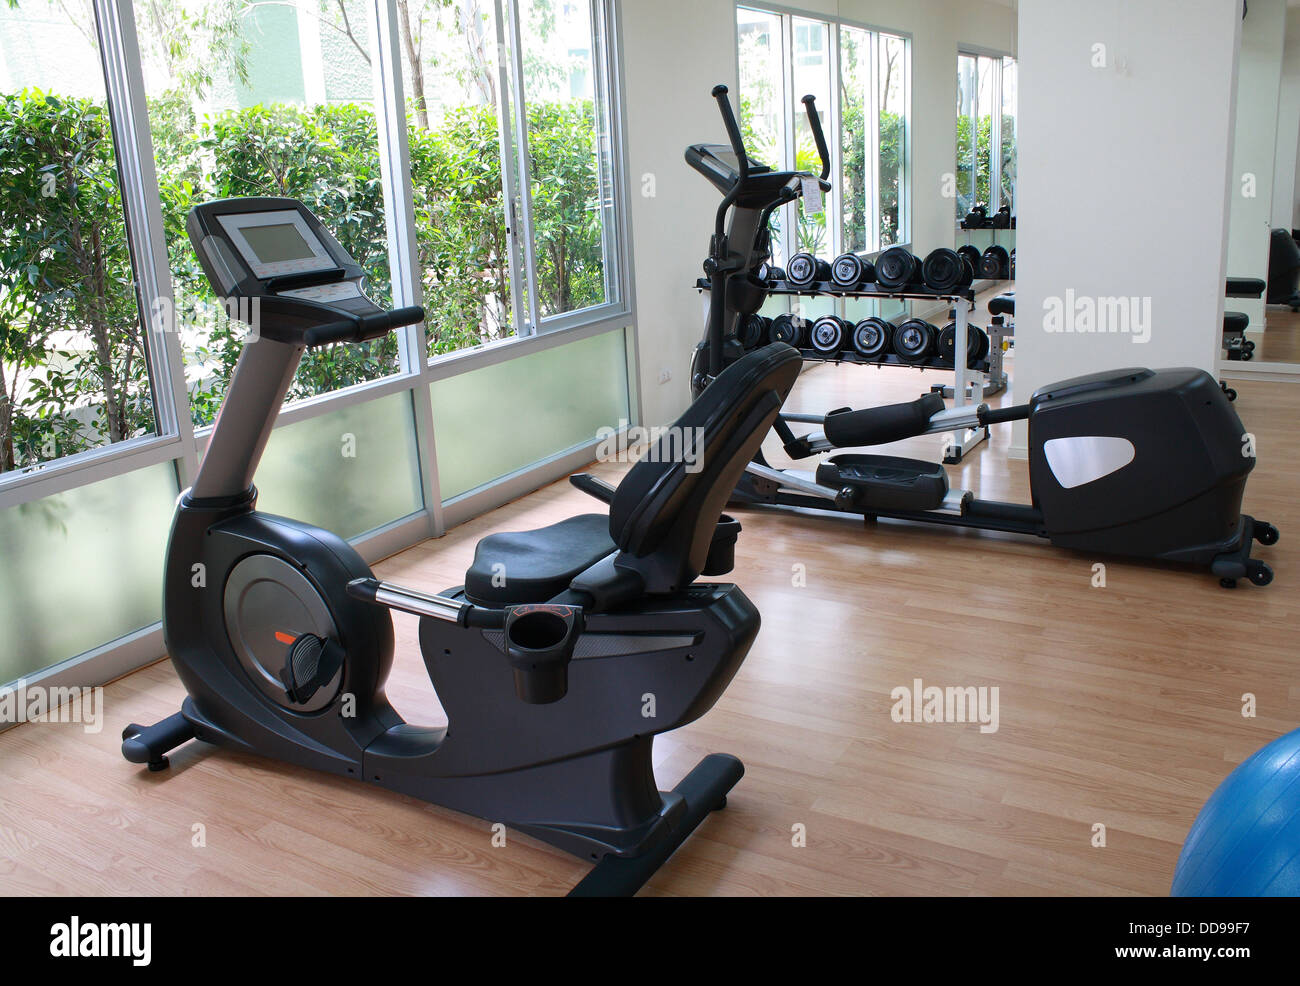 equipment in fitness room include treadmill, stationary bike, dumbbell and ball Stock Photo